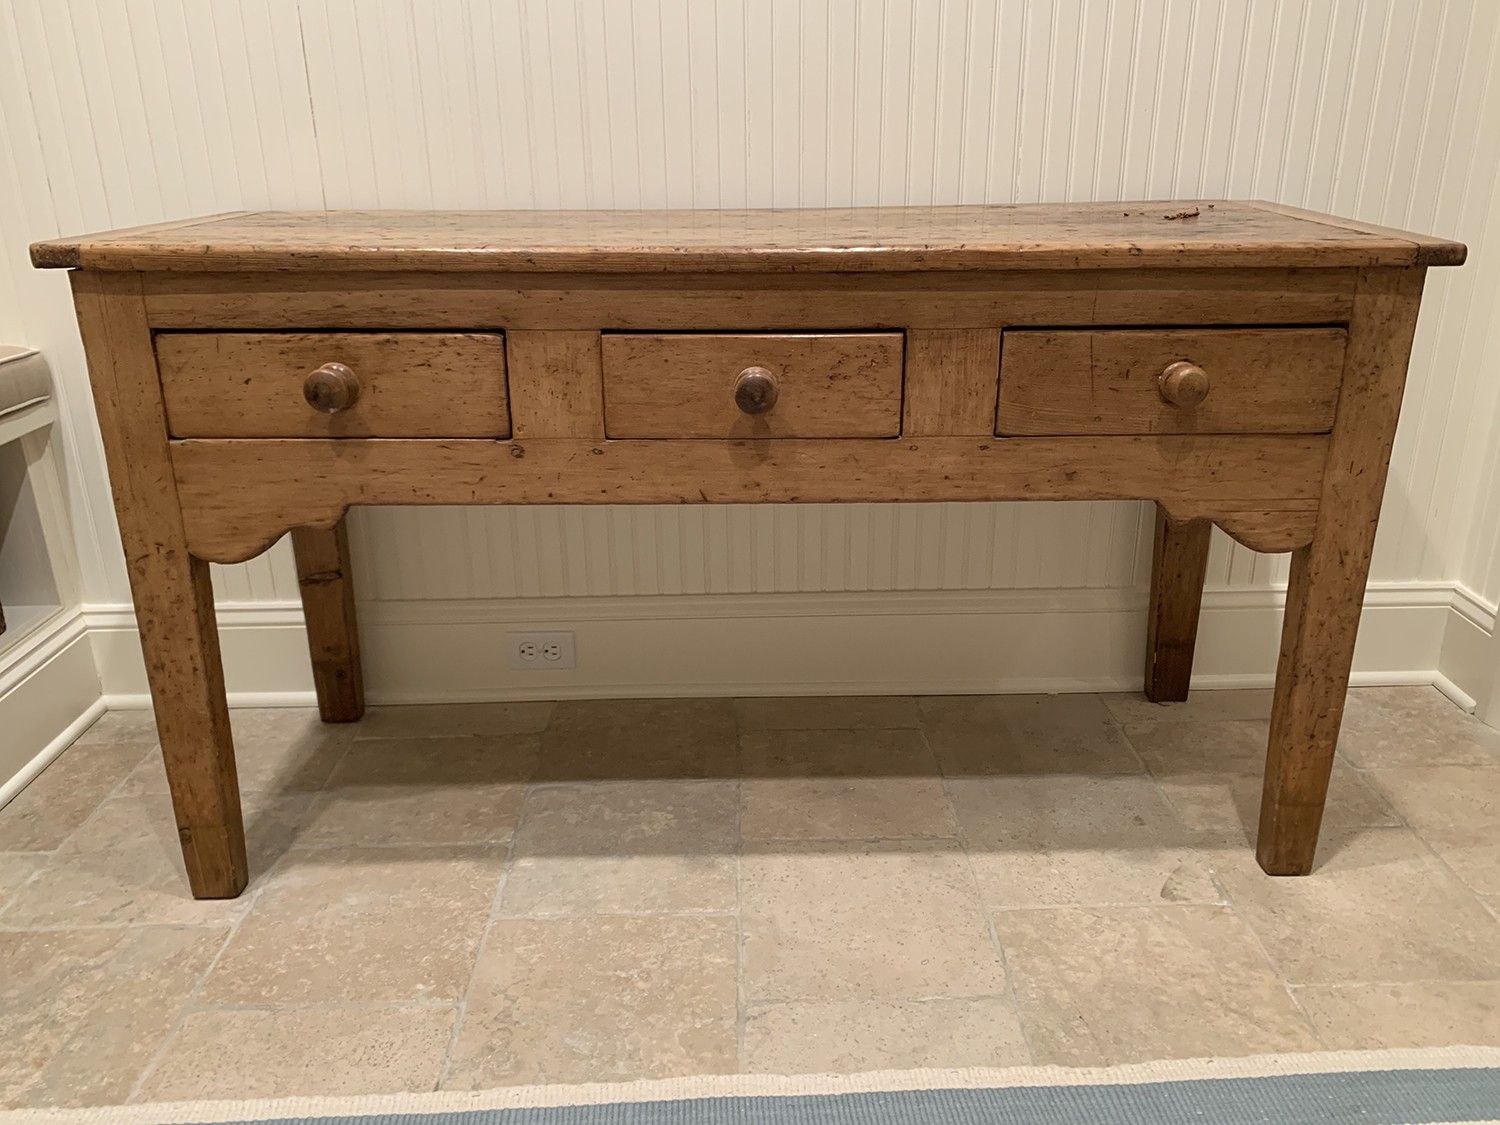 Antique Rustic Pine Console Table • The Local Vault With Antique Console Tables (View 19 of 20)